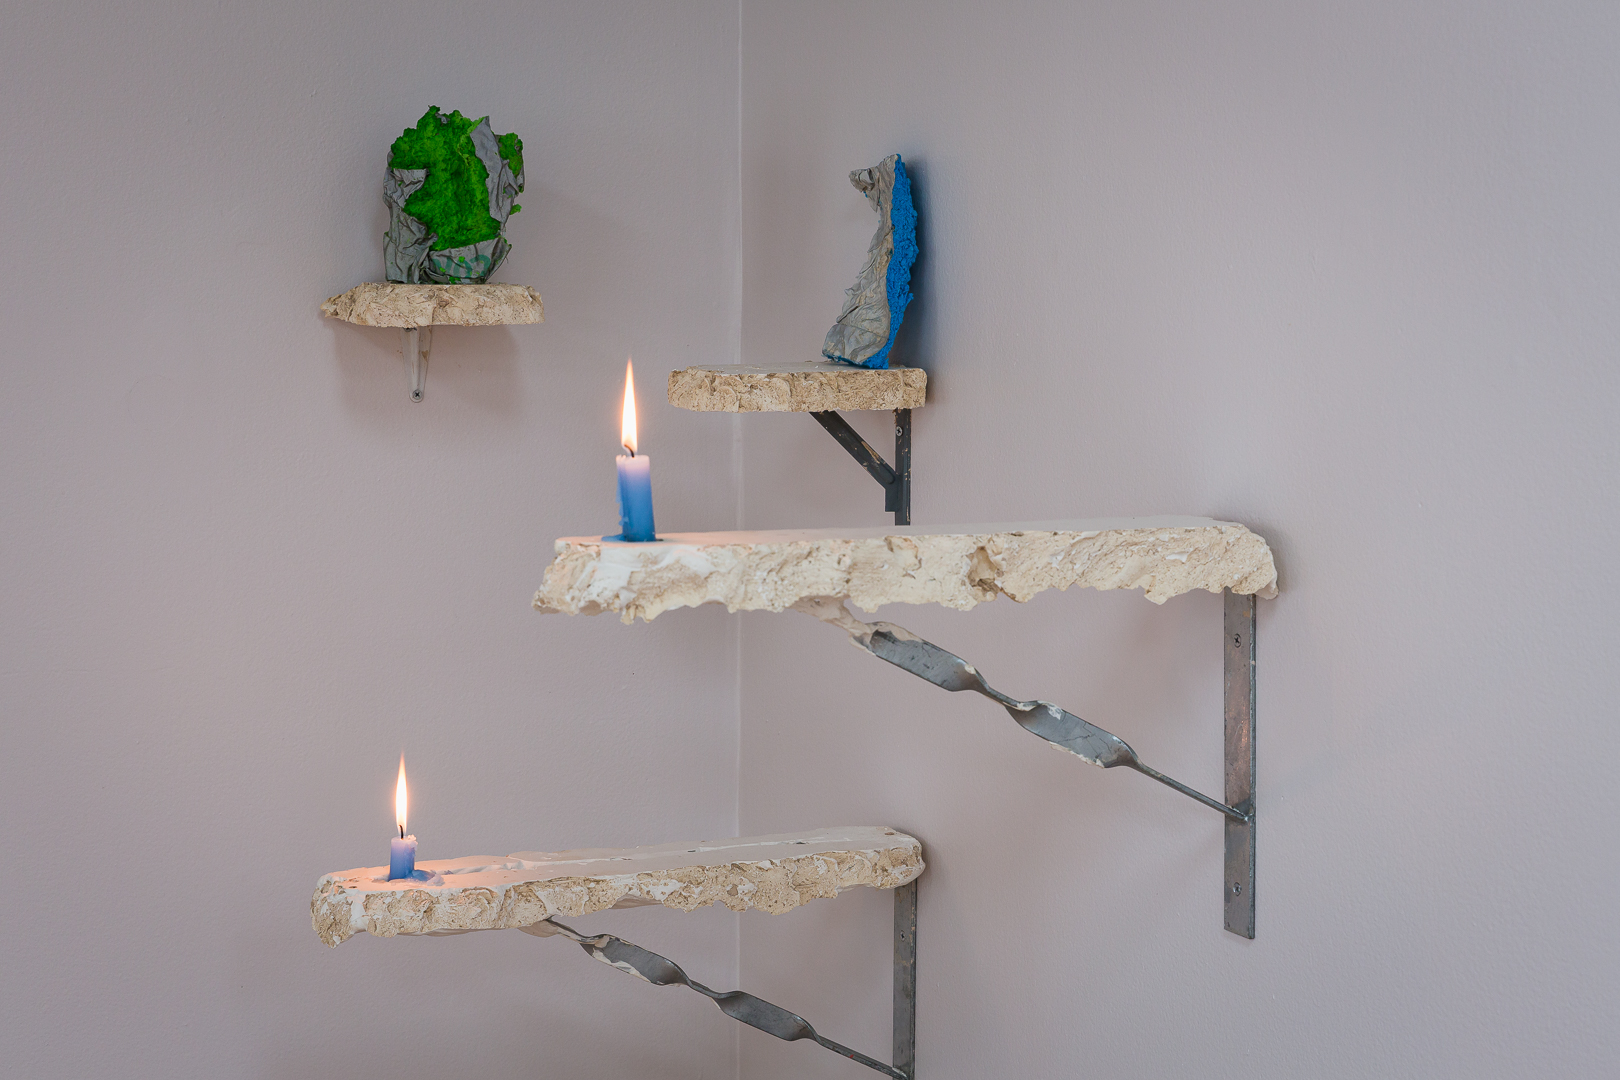 Othy Willis, <em>Retroreflective experiment 1 with plaster shelves and Candle</em>, 2023, retroreflective fabric, recycled paper, plaster, steel, dimensions variable, Pari. Photographer: Document Photography